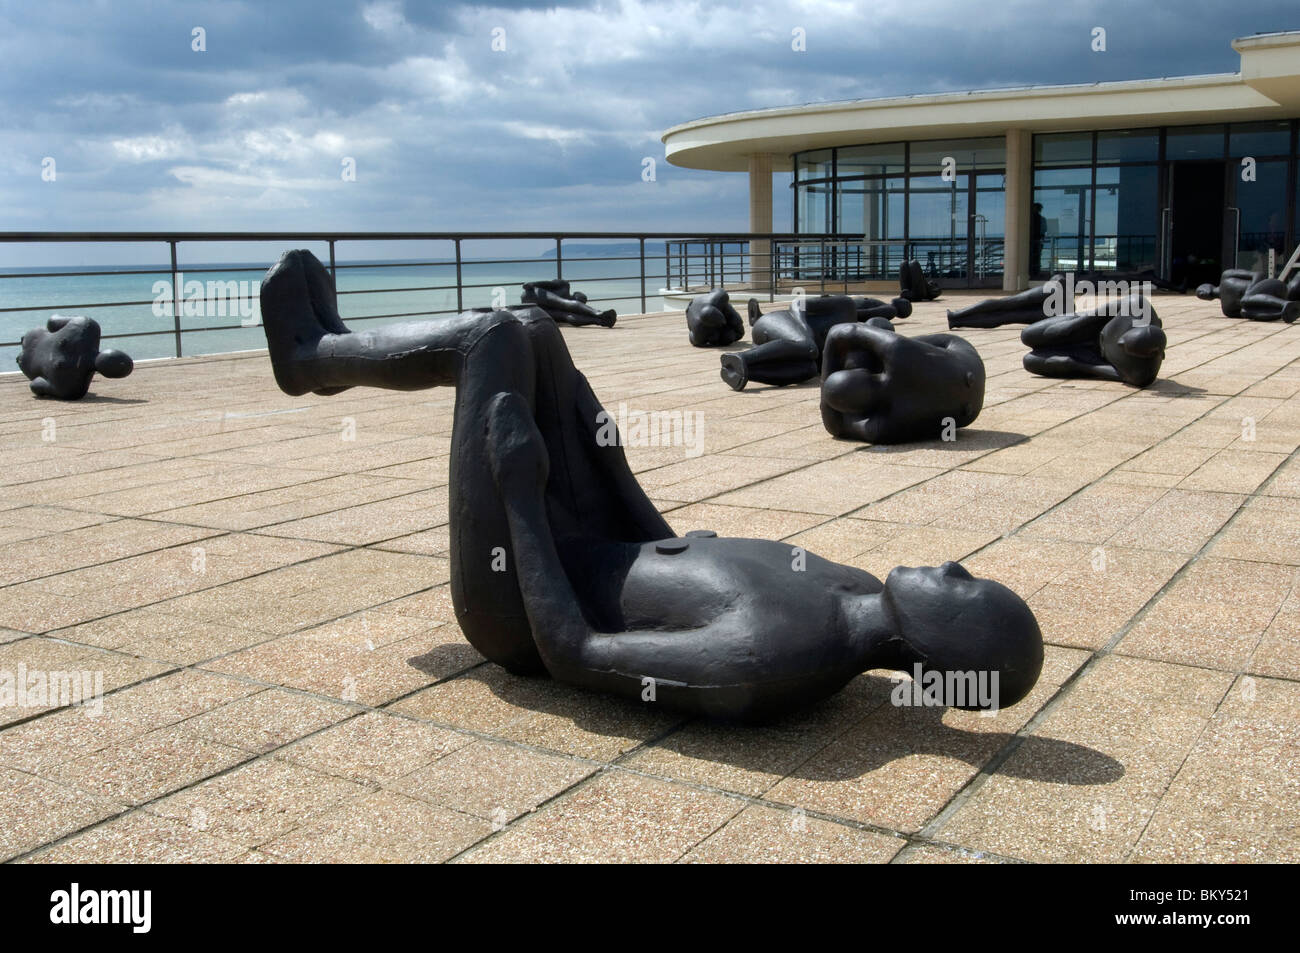 Antony Gormley's 60 'Critical Mass' sculptures on the roof of the Art Deco De La Warr Pavilion in Bexhill on Sea, East Sussex.. Stock Photo